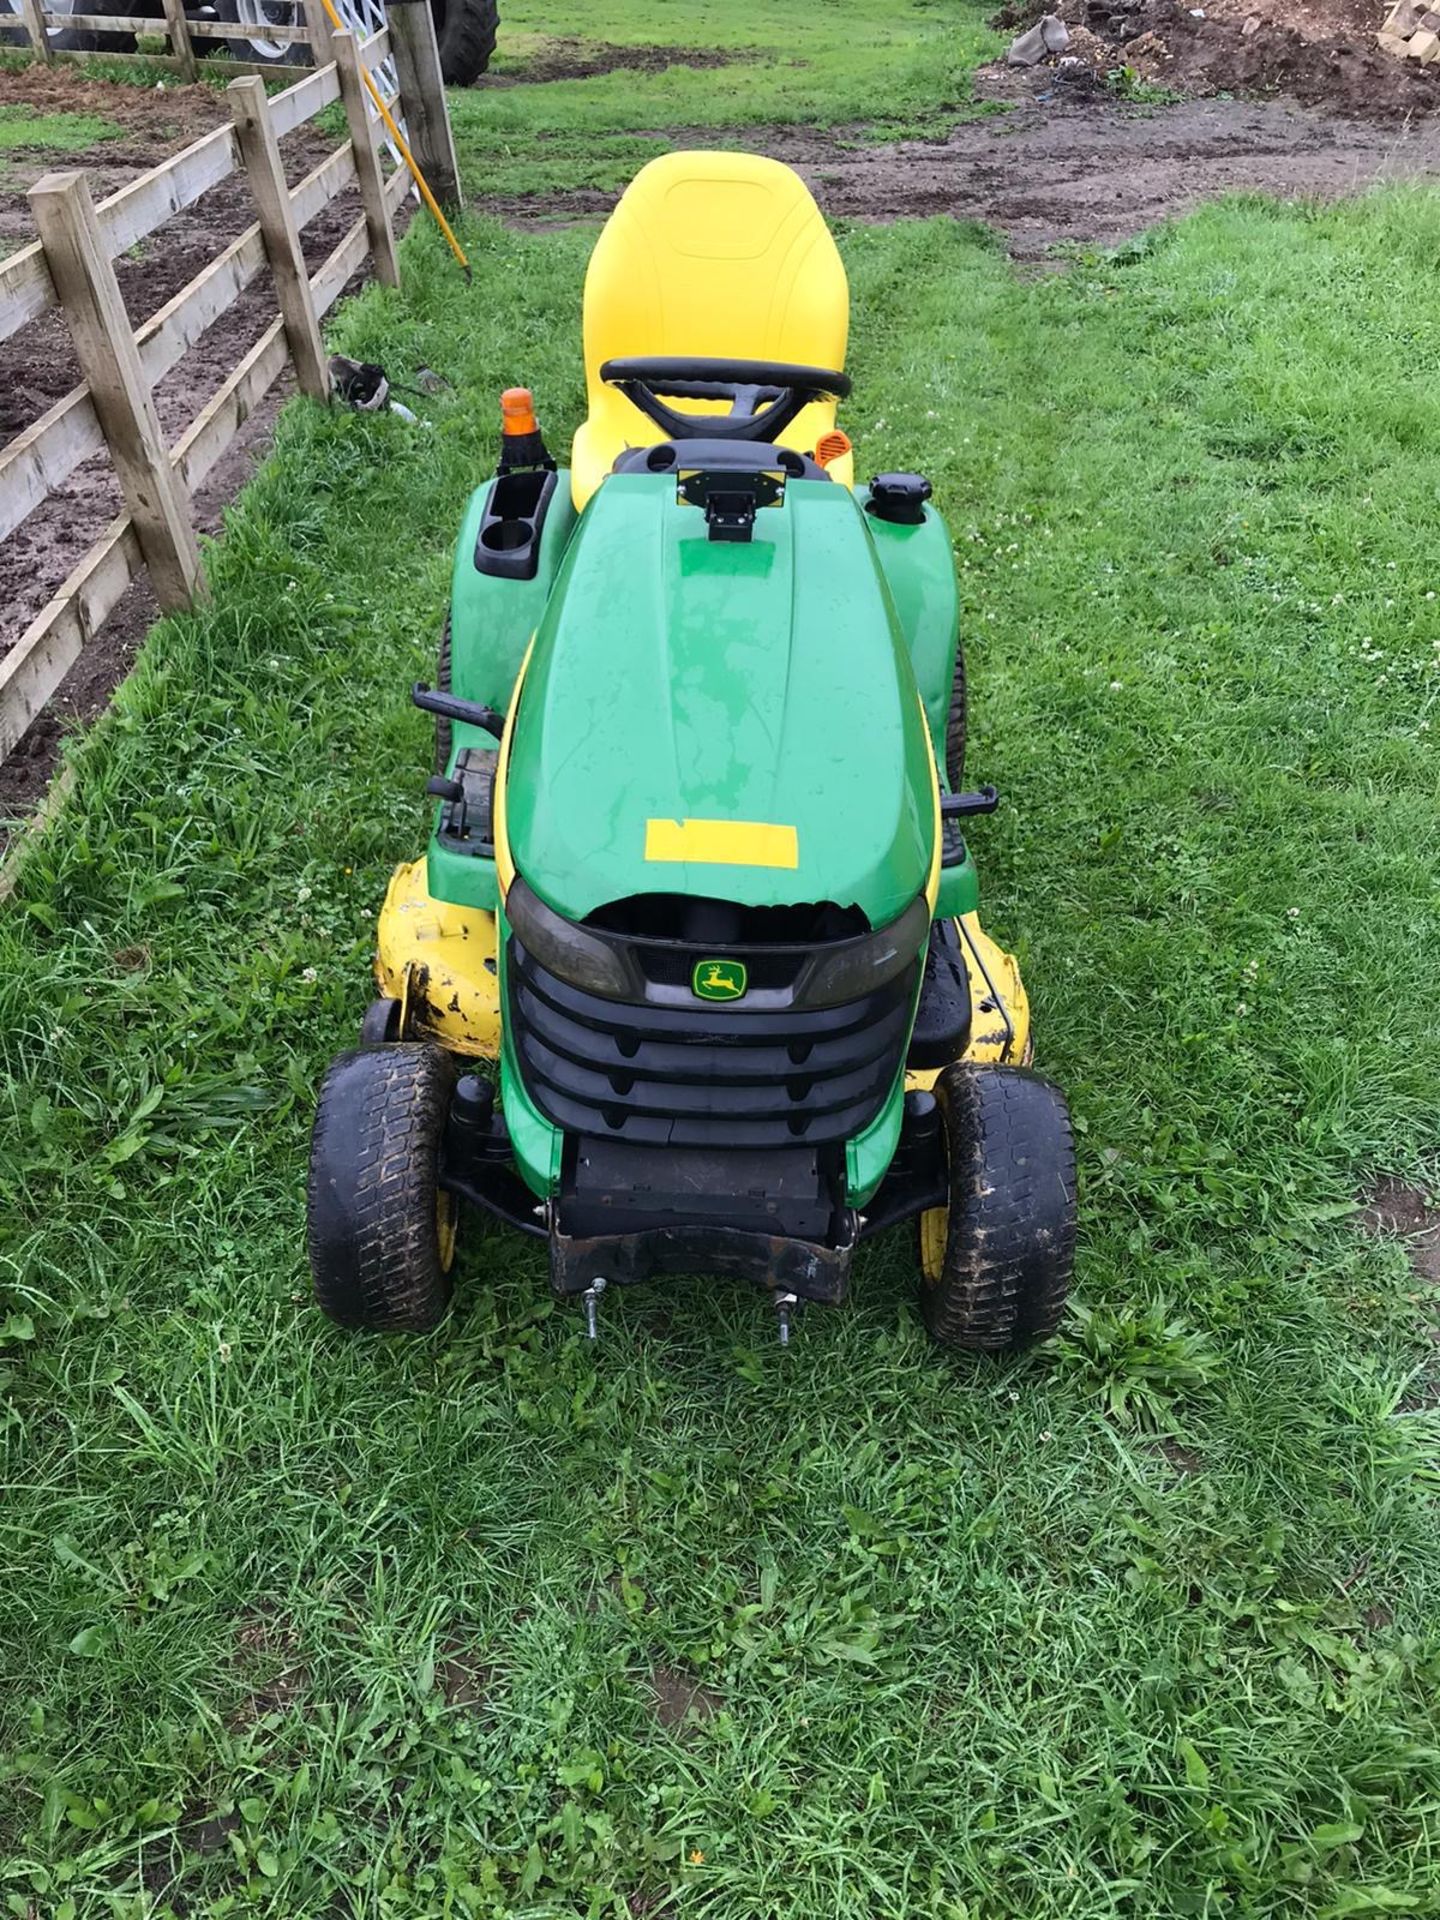 JOHN DEERE X320 RIDE ON LAWN MOWER, C/W 42" MID MOUNTED DECK, YEAR 2013, WORKING HOURS 1237 - Image 4 of 7